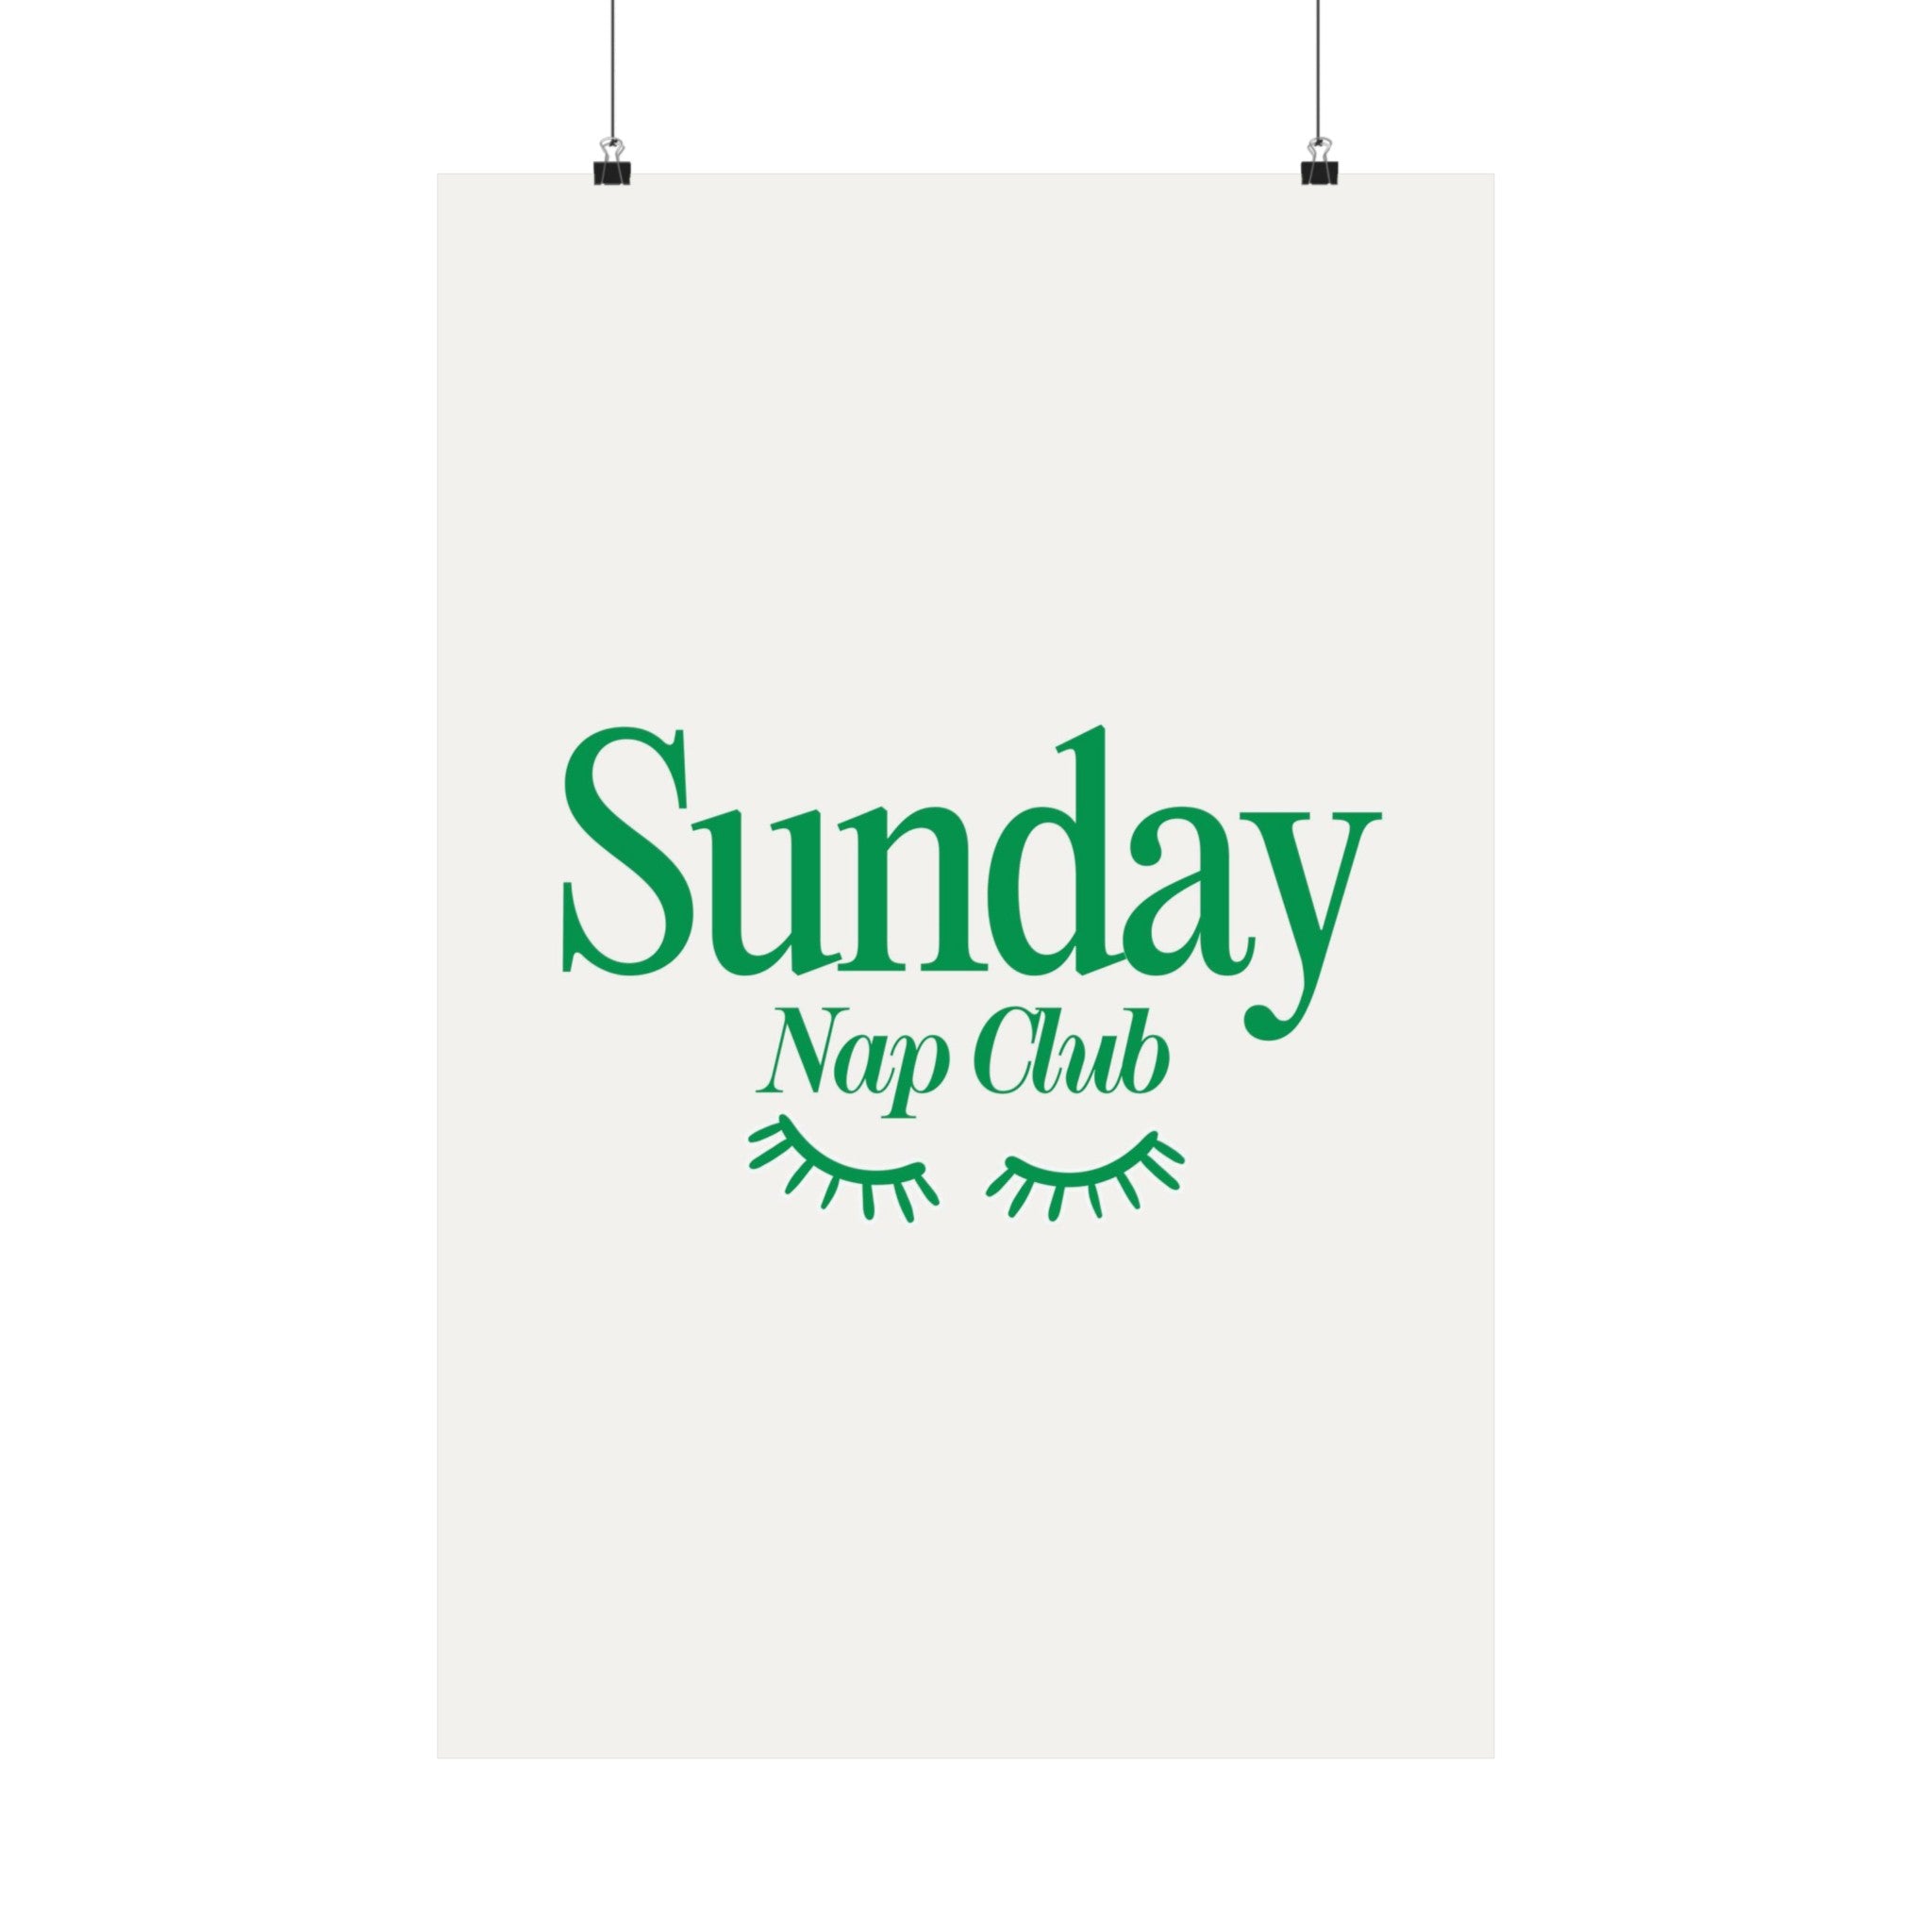 Sunday Nap Club Physical Poster